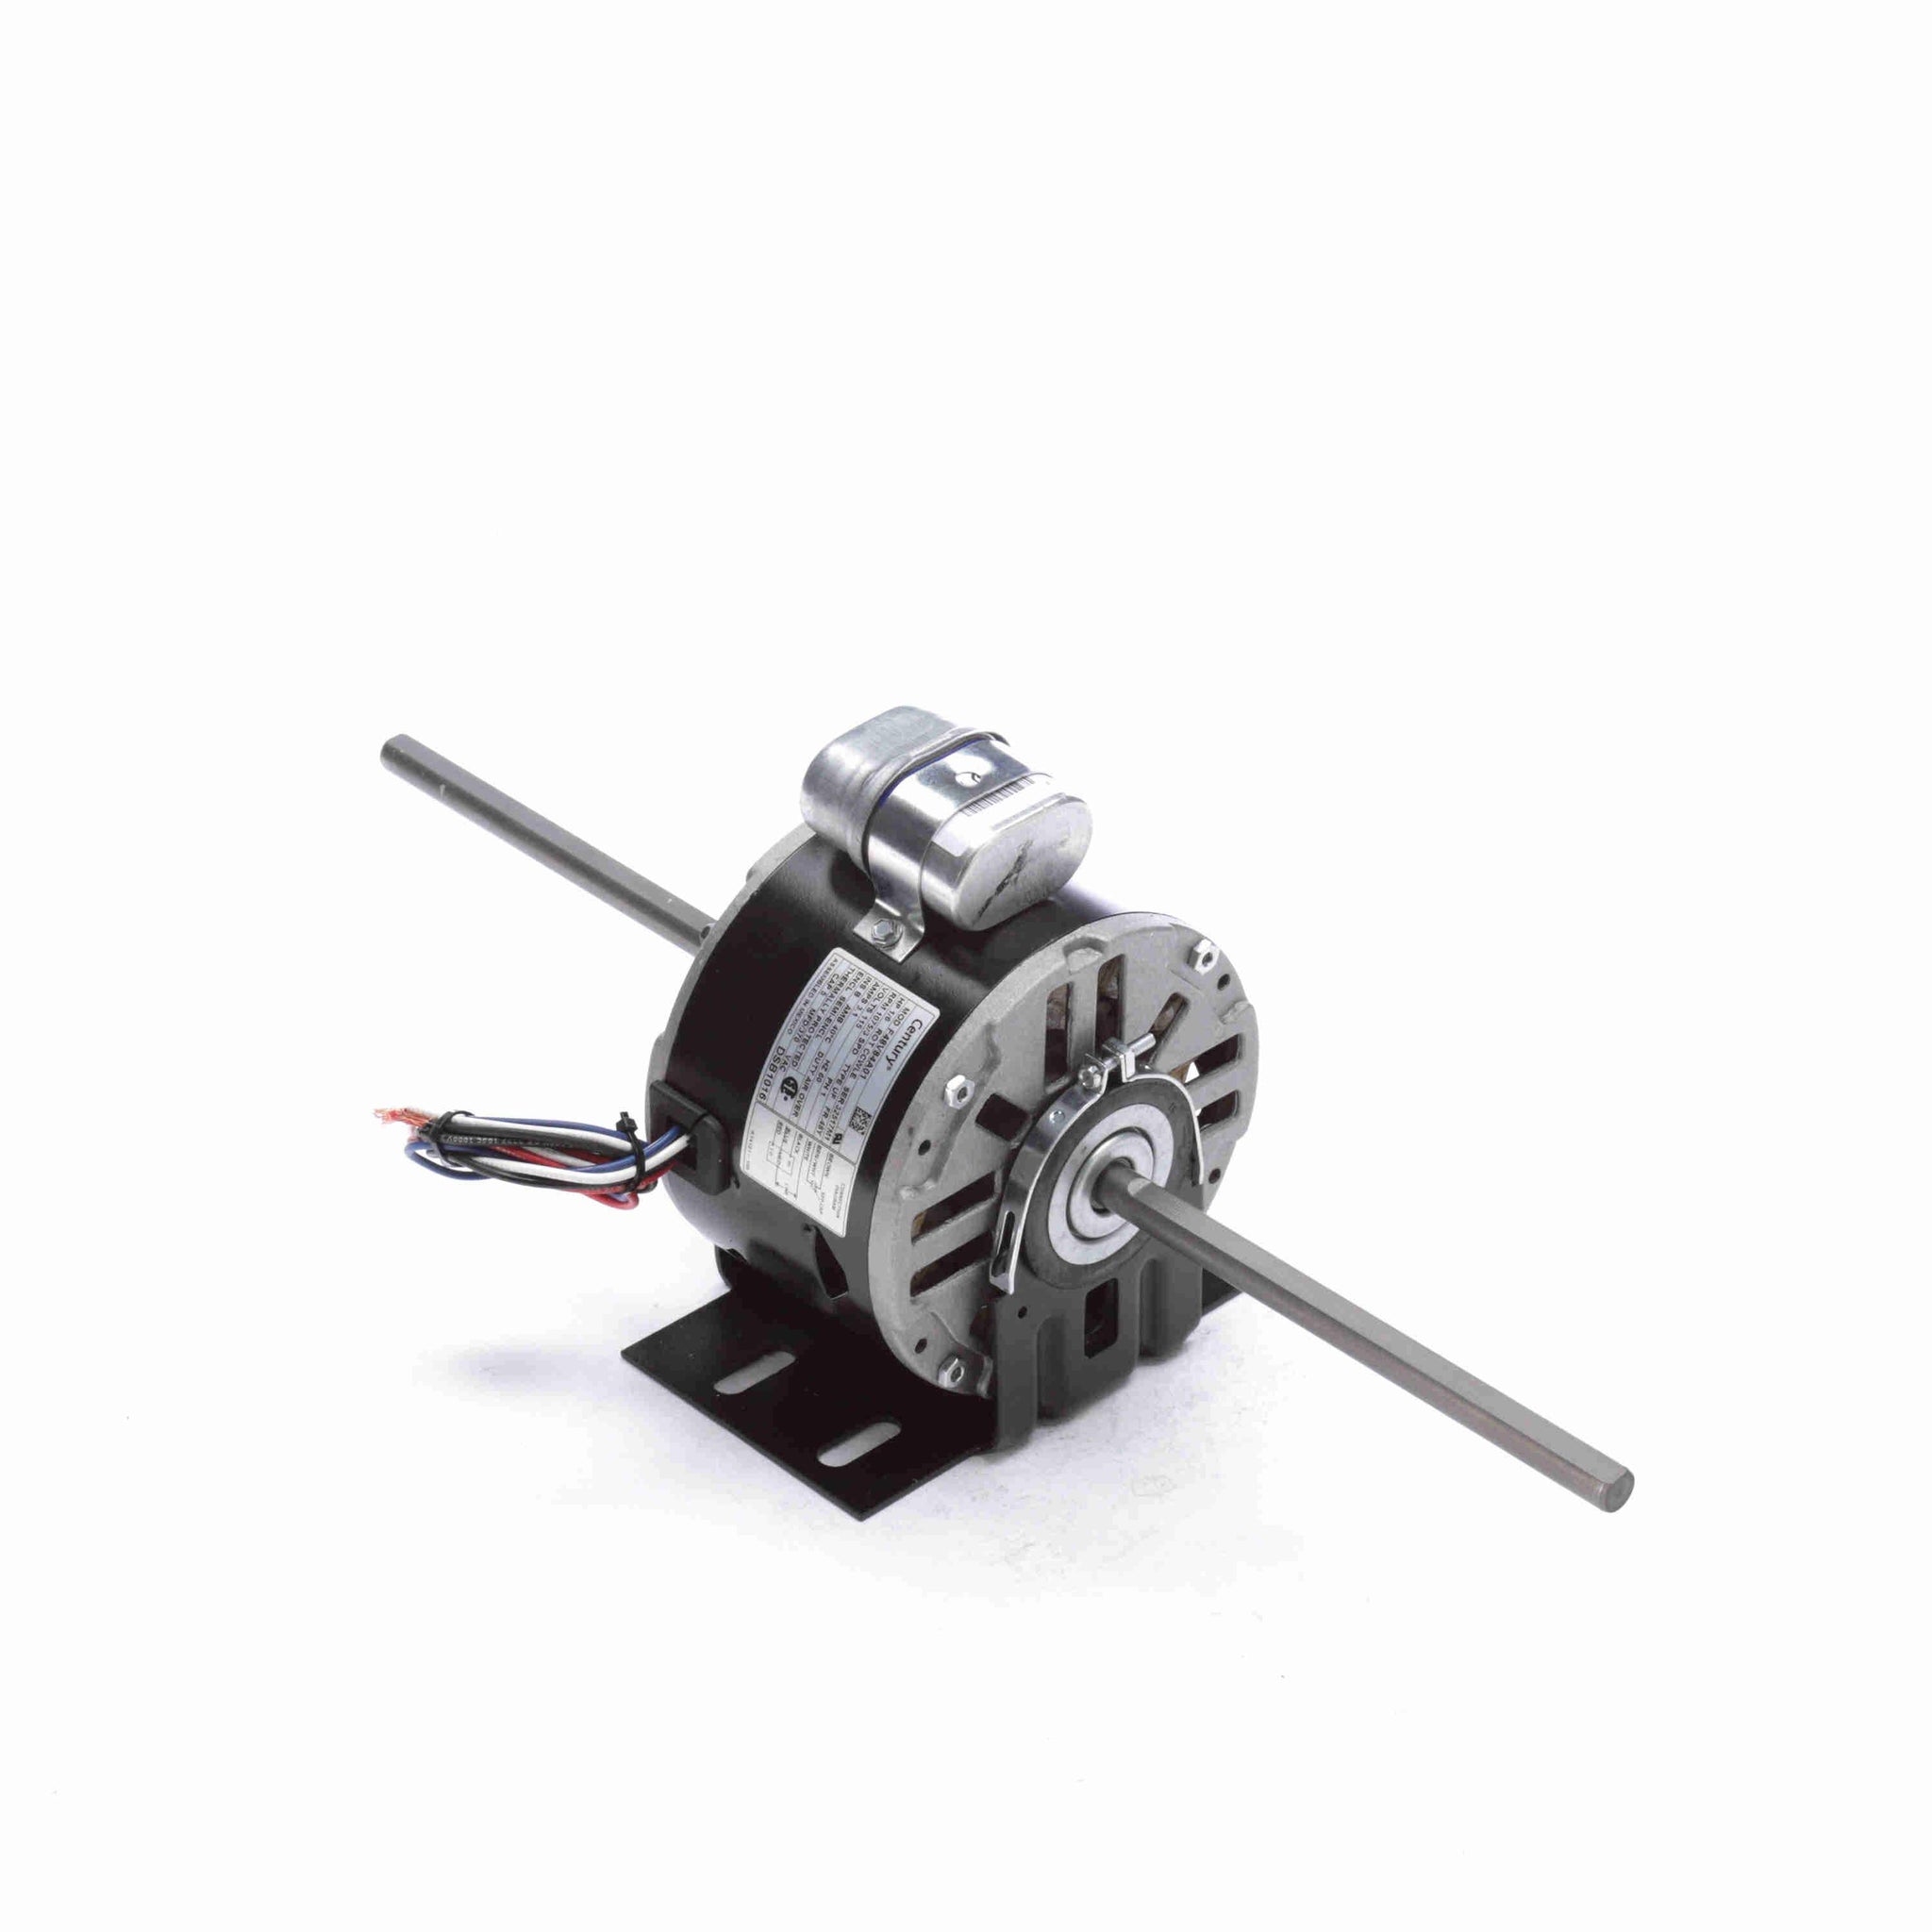 DSB1016 - 1/6 HP Fan Coil / Room Air Conditioner Motor, 1075 RPM, 3 Speed, 115 Volts, 48 Frame, Semi Enclosed - Hardware & Moreee